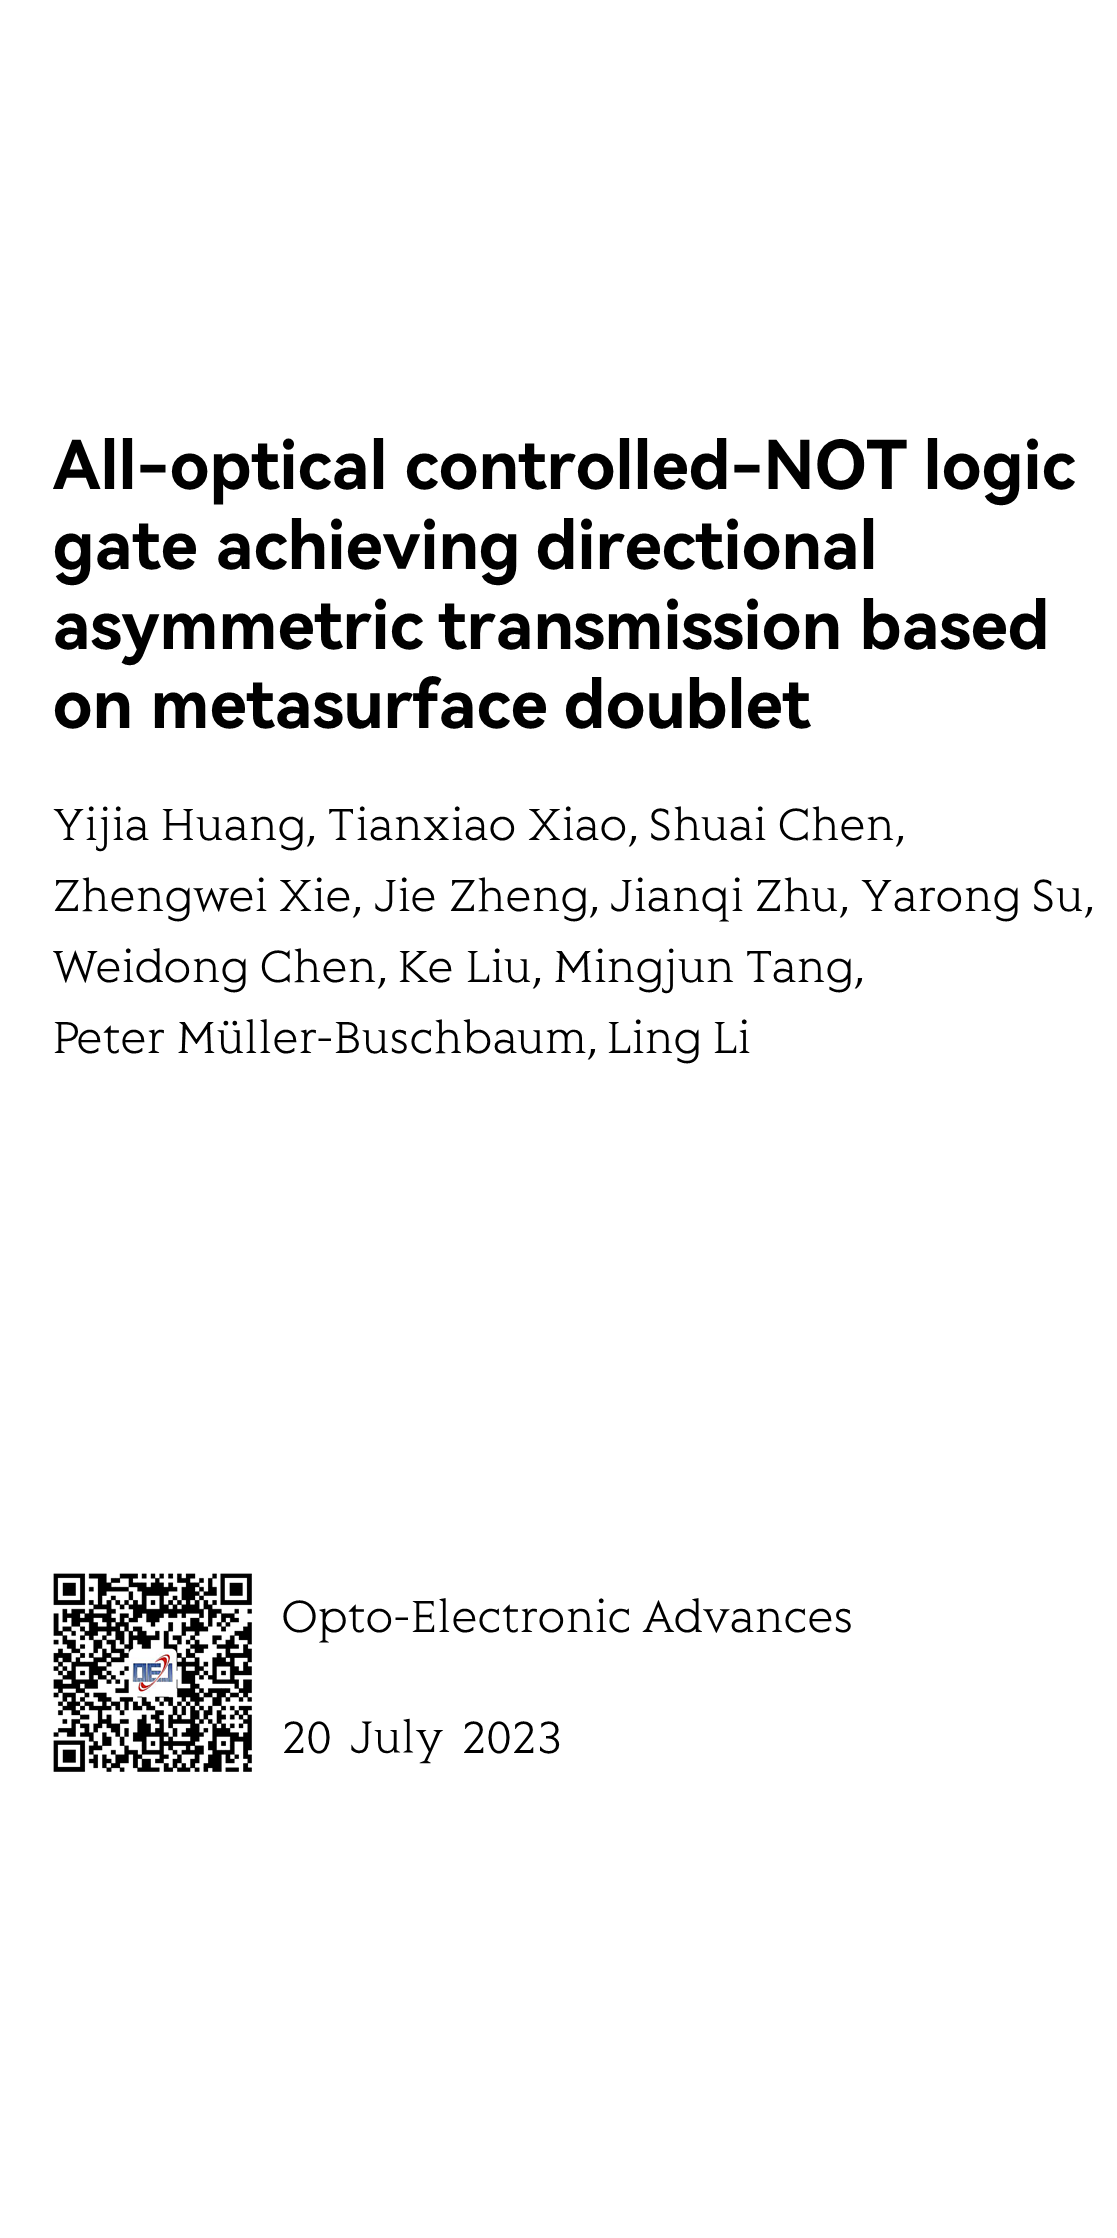 All-optical controlled-NOT logic gate achieving directional asymmetric transmission based on metasurface doublet_1